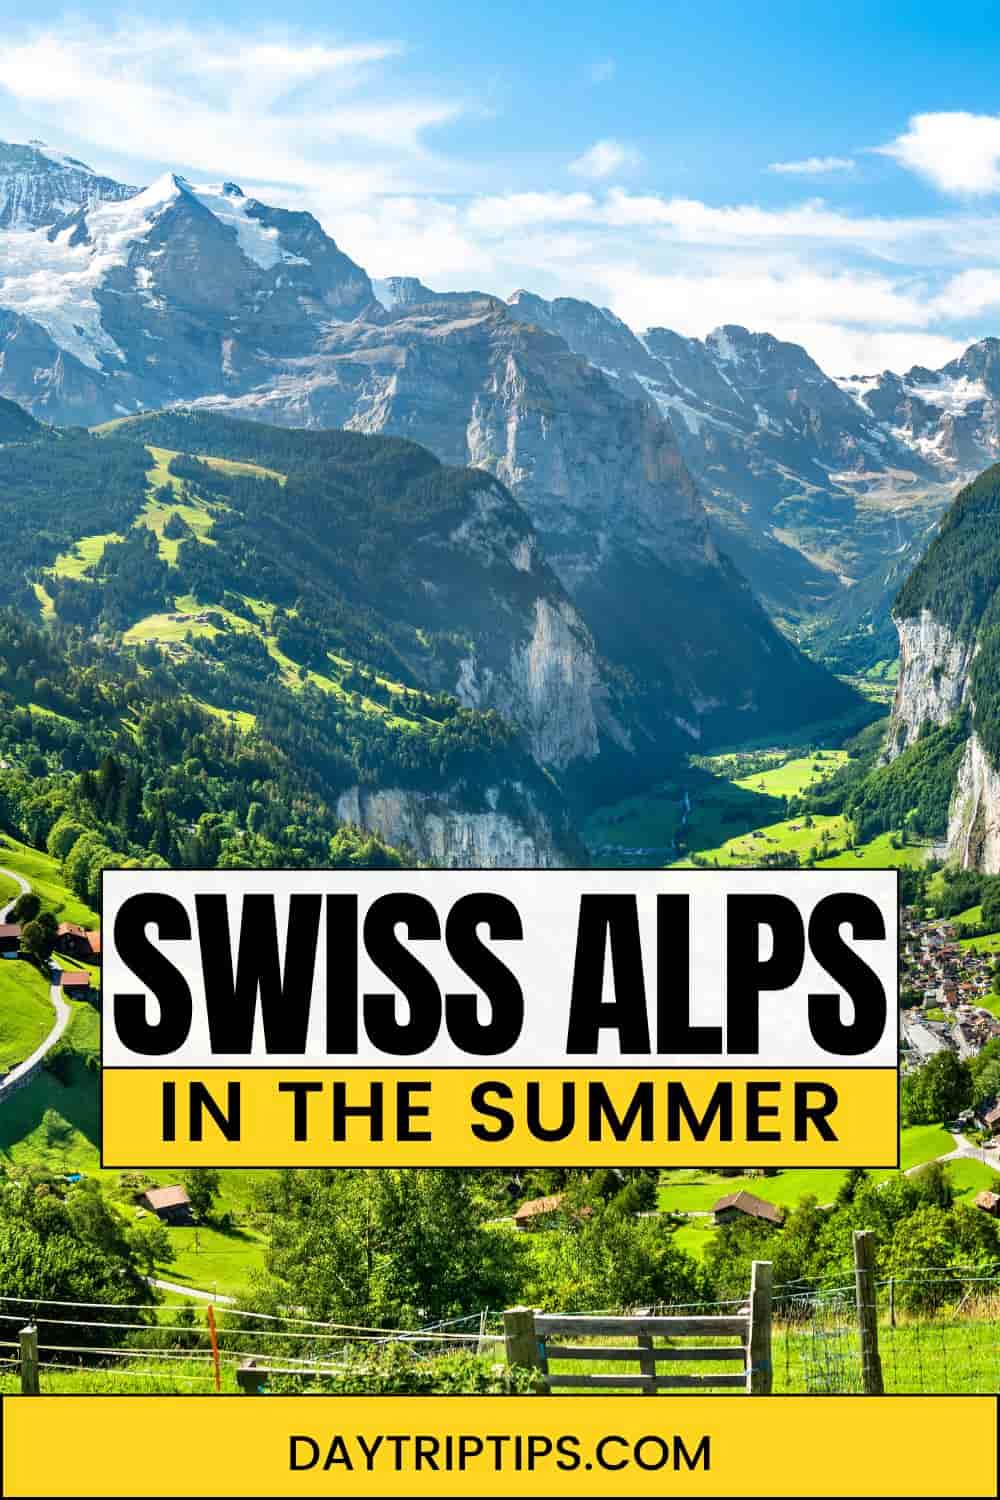 Why You Should Visit the Swiss Alps in the Summer